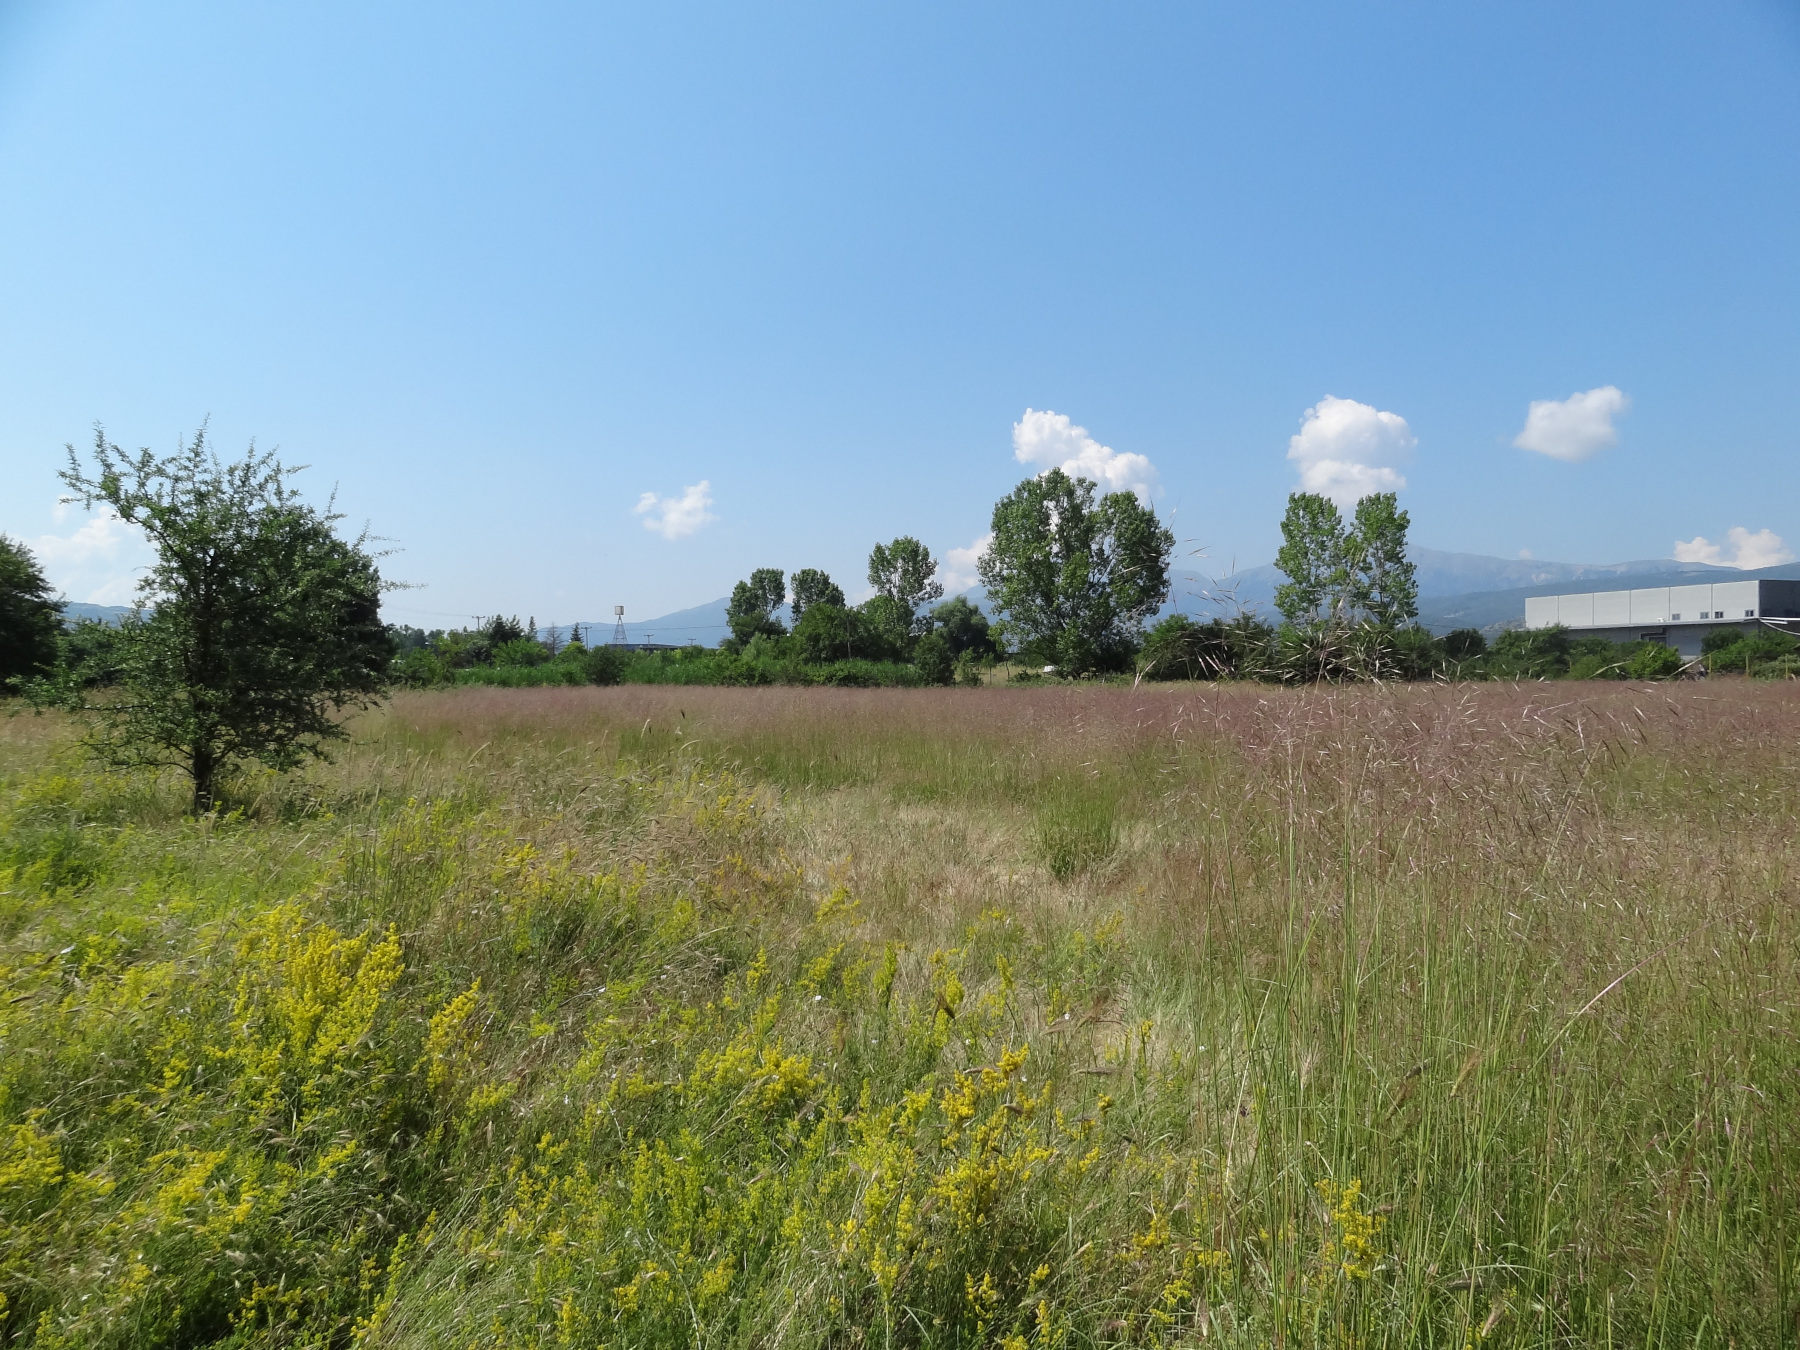 For sale a plot of 4,961 sq.m. near the Panepirotic Stadium of Ioannina next to the National Road Ioannina - Athens